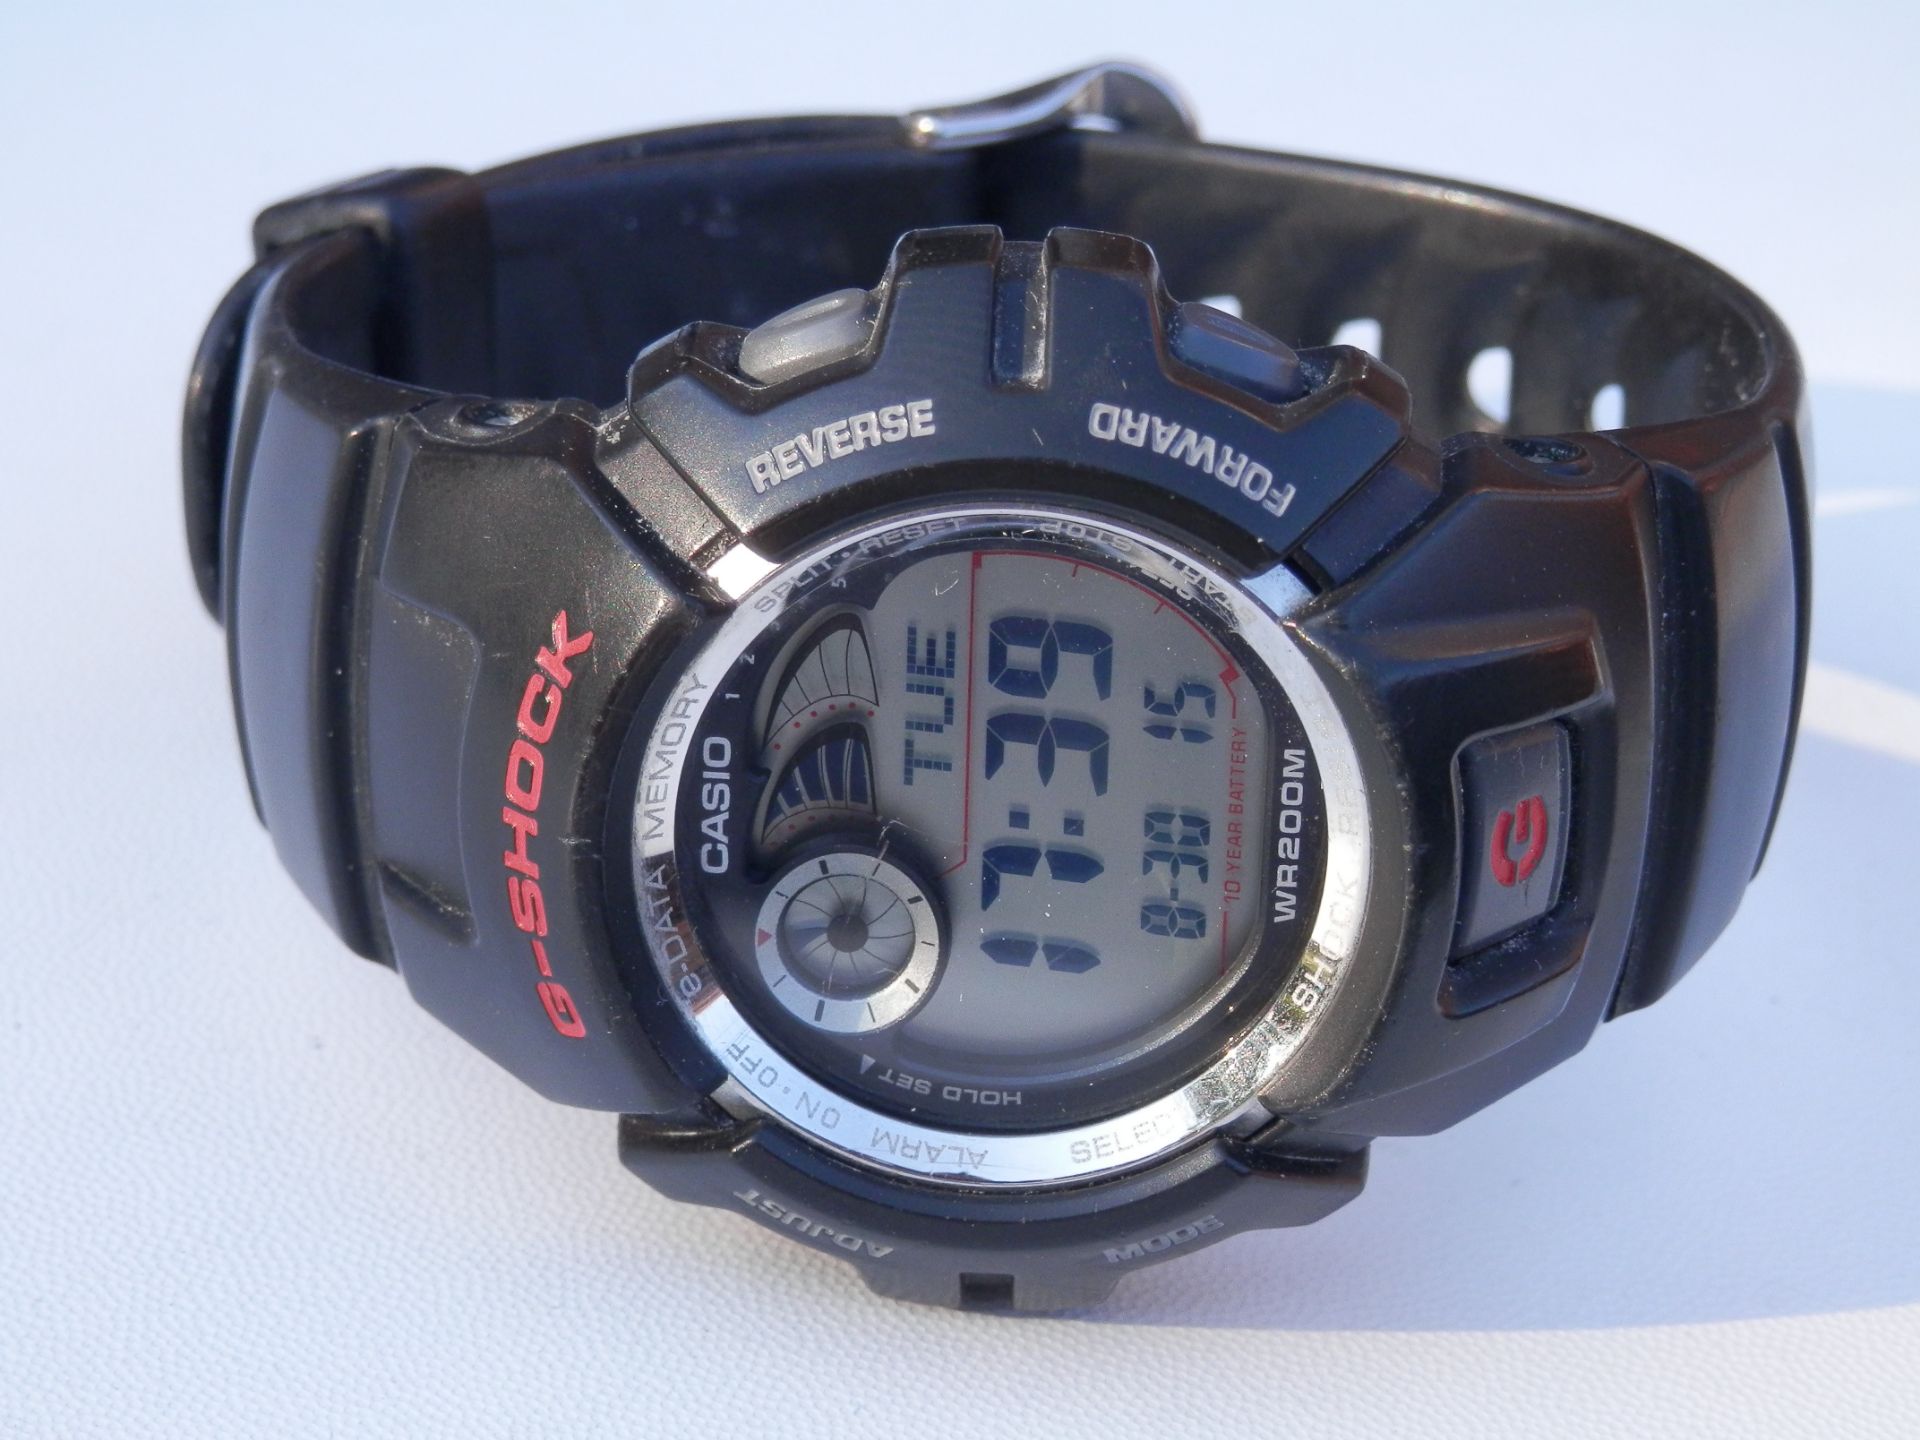 GENTS CASIO G-SHOCK 2900G 200 METRE DIGITAL SPORTS WATCH, ALL WORKING. GREAT WATCH RRP £89.99 - Image 6 of 9